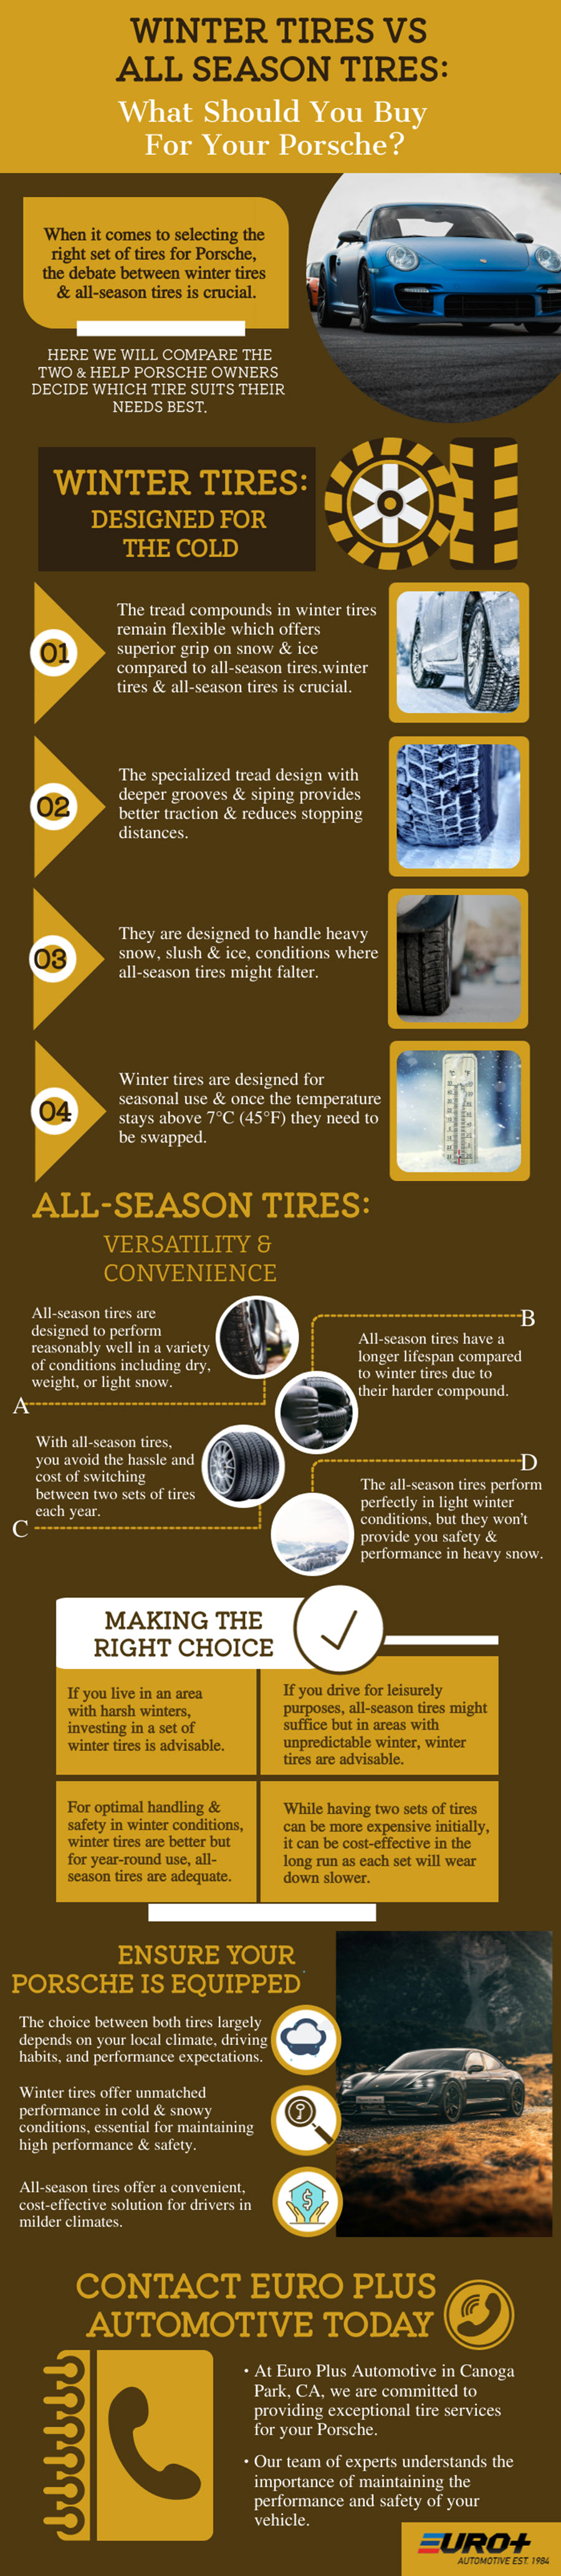 Winter Tires Vs All Season Tires - What Should You Buy For Your Porsche